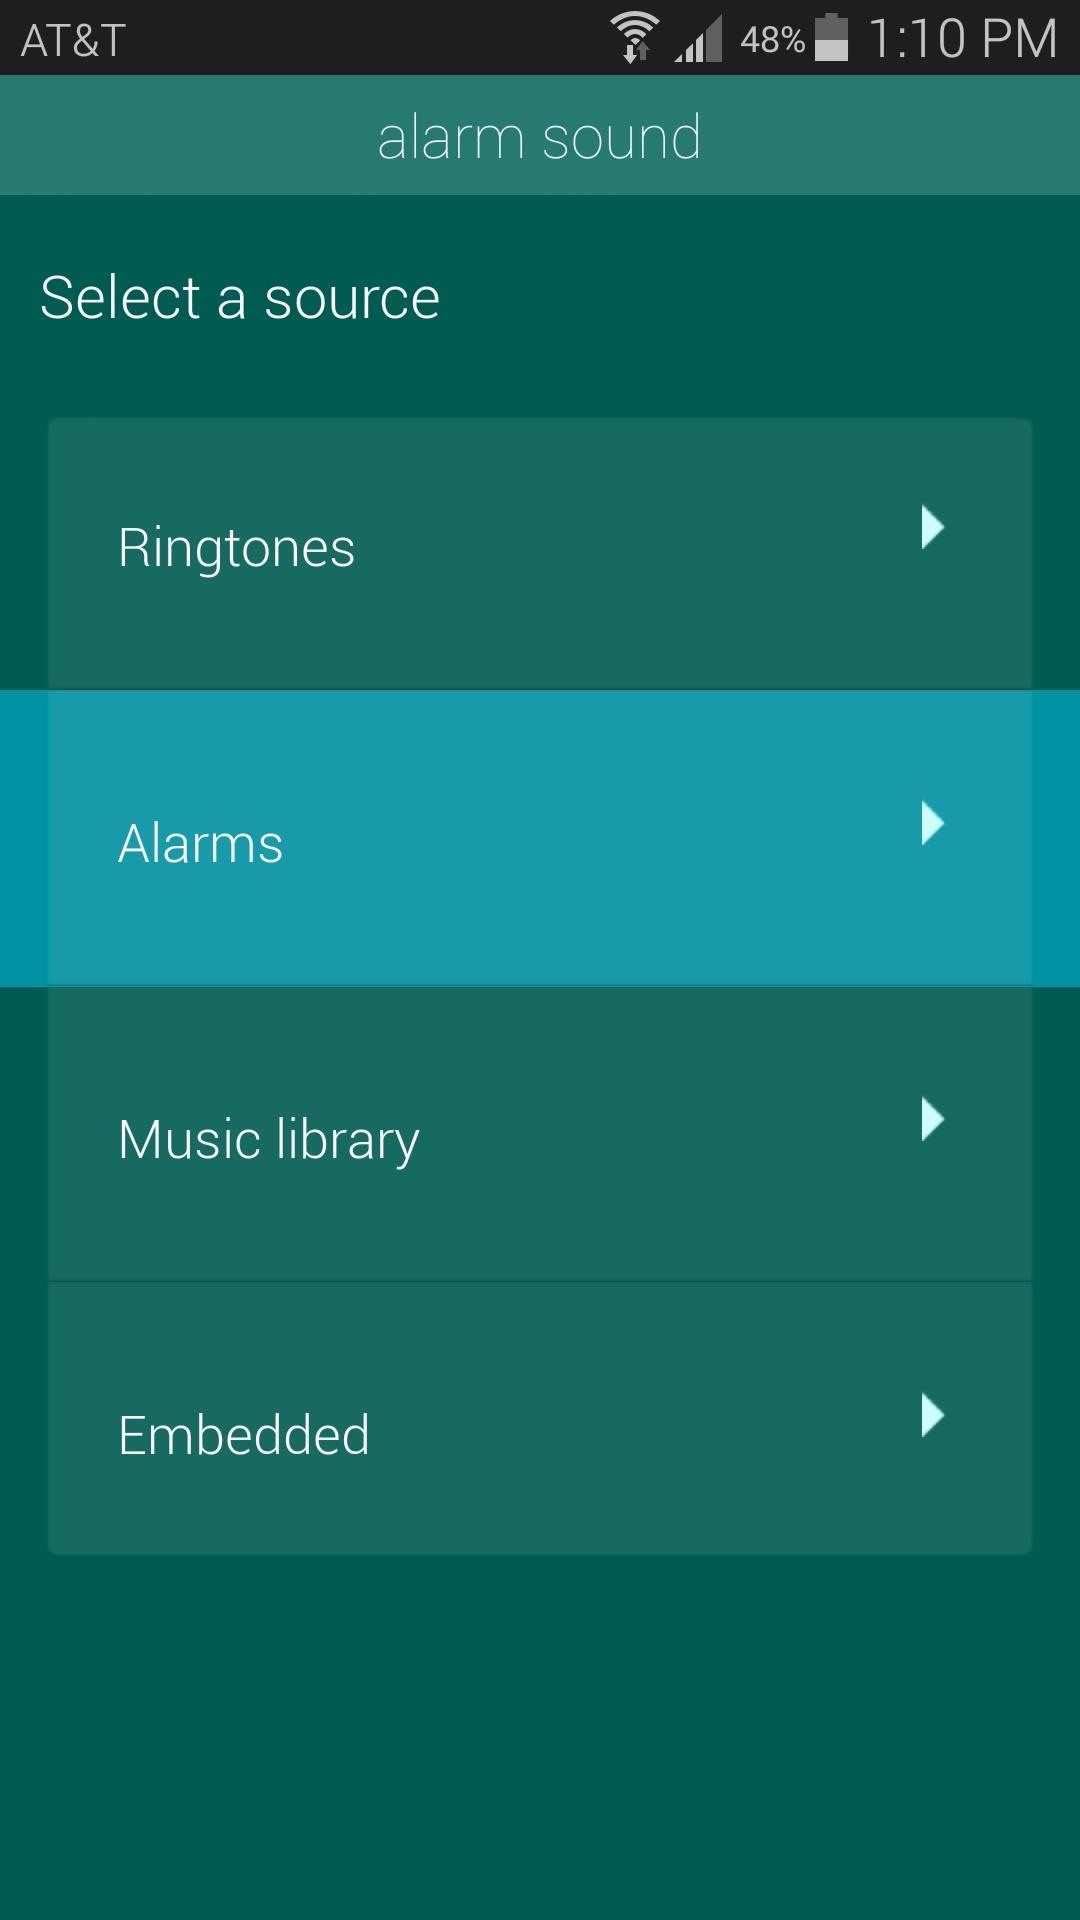 Wake Up Less Cranky with an Alarm Clock for Android That Simulates the Sun Rising